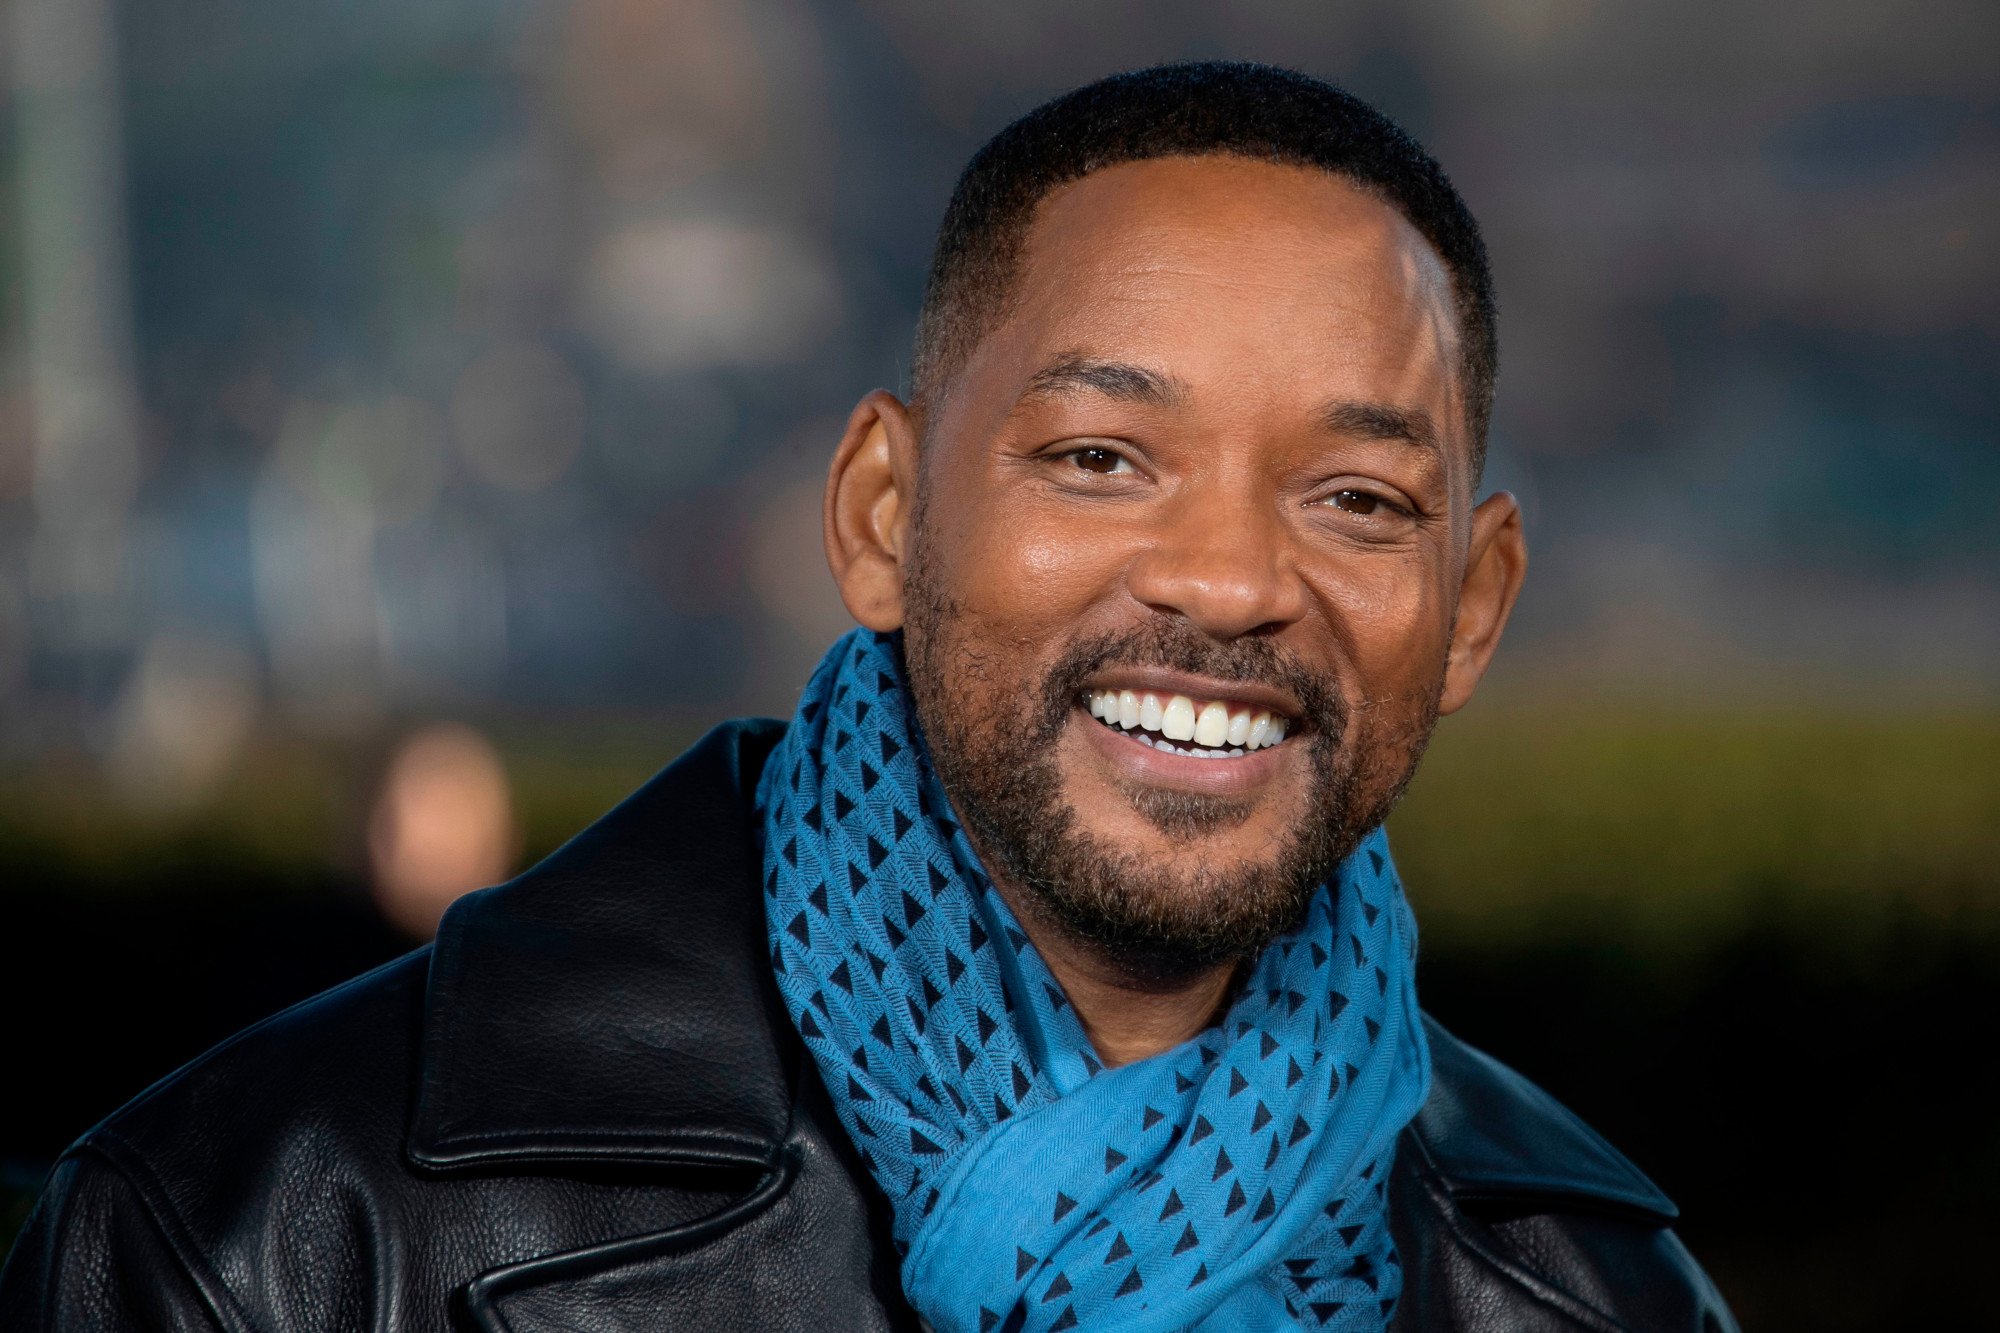 'Suicide Squad' star Will Smith wearing a black jacket and blue scarf and smiling.